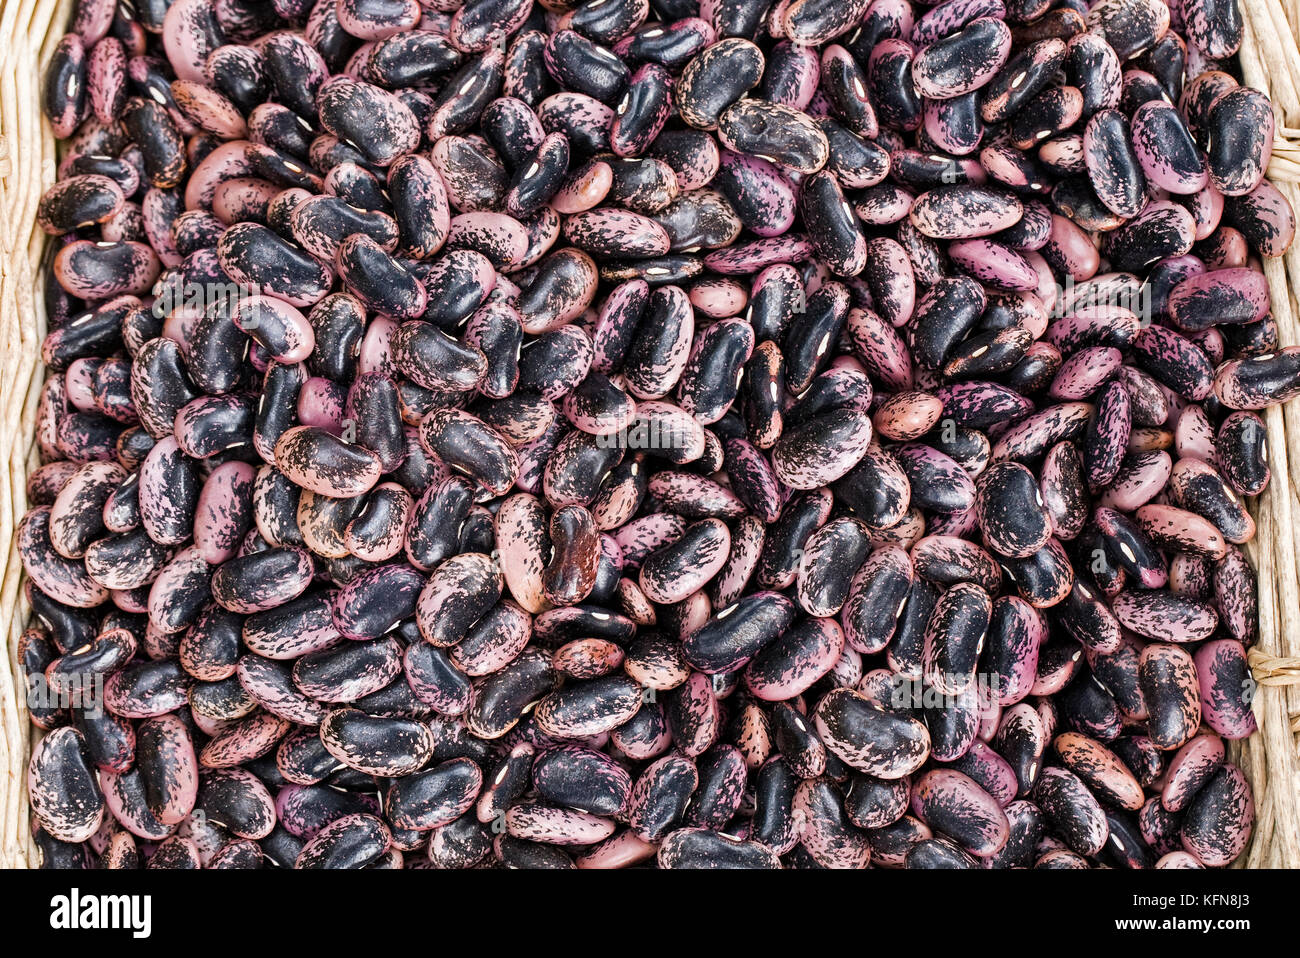 Phaseolus coccineus, Dried runner bean seeds in a basket. Stock Photo